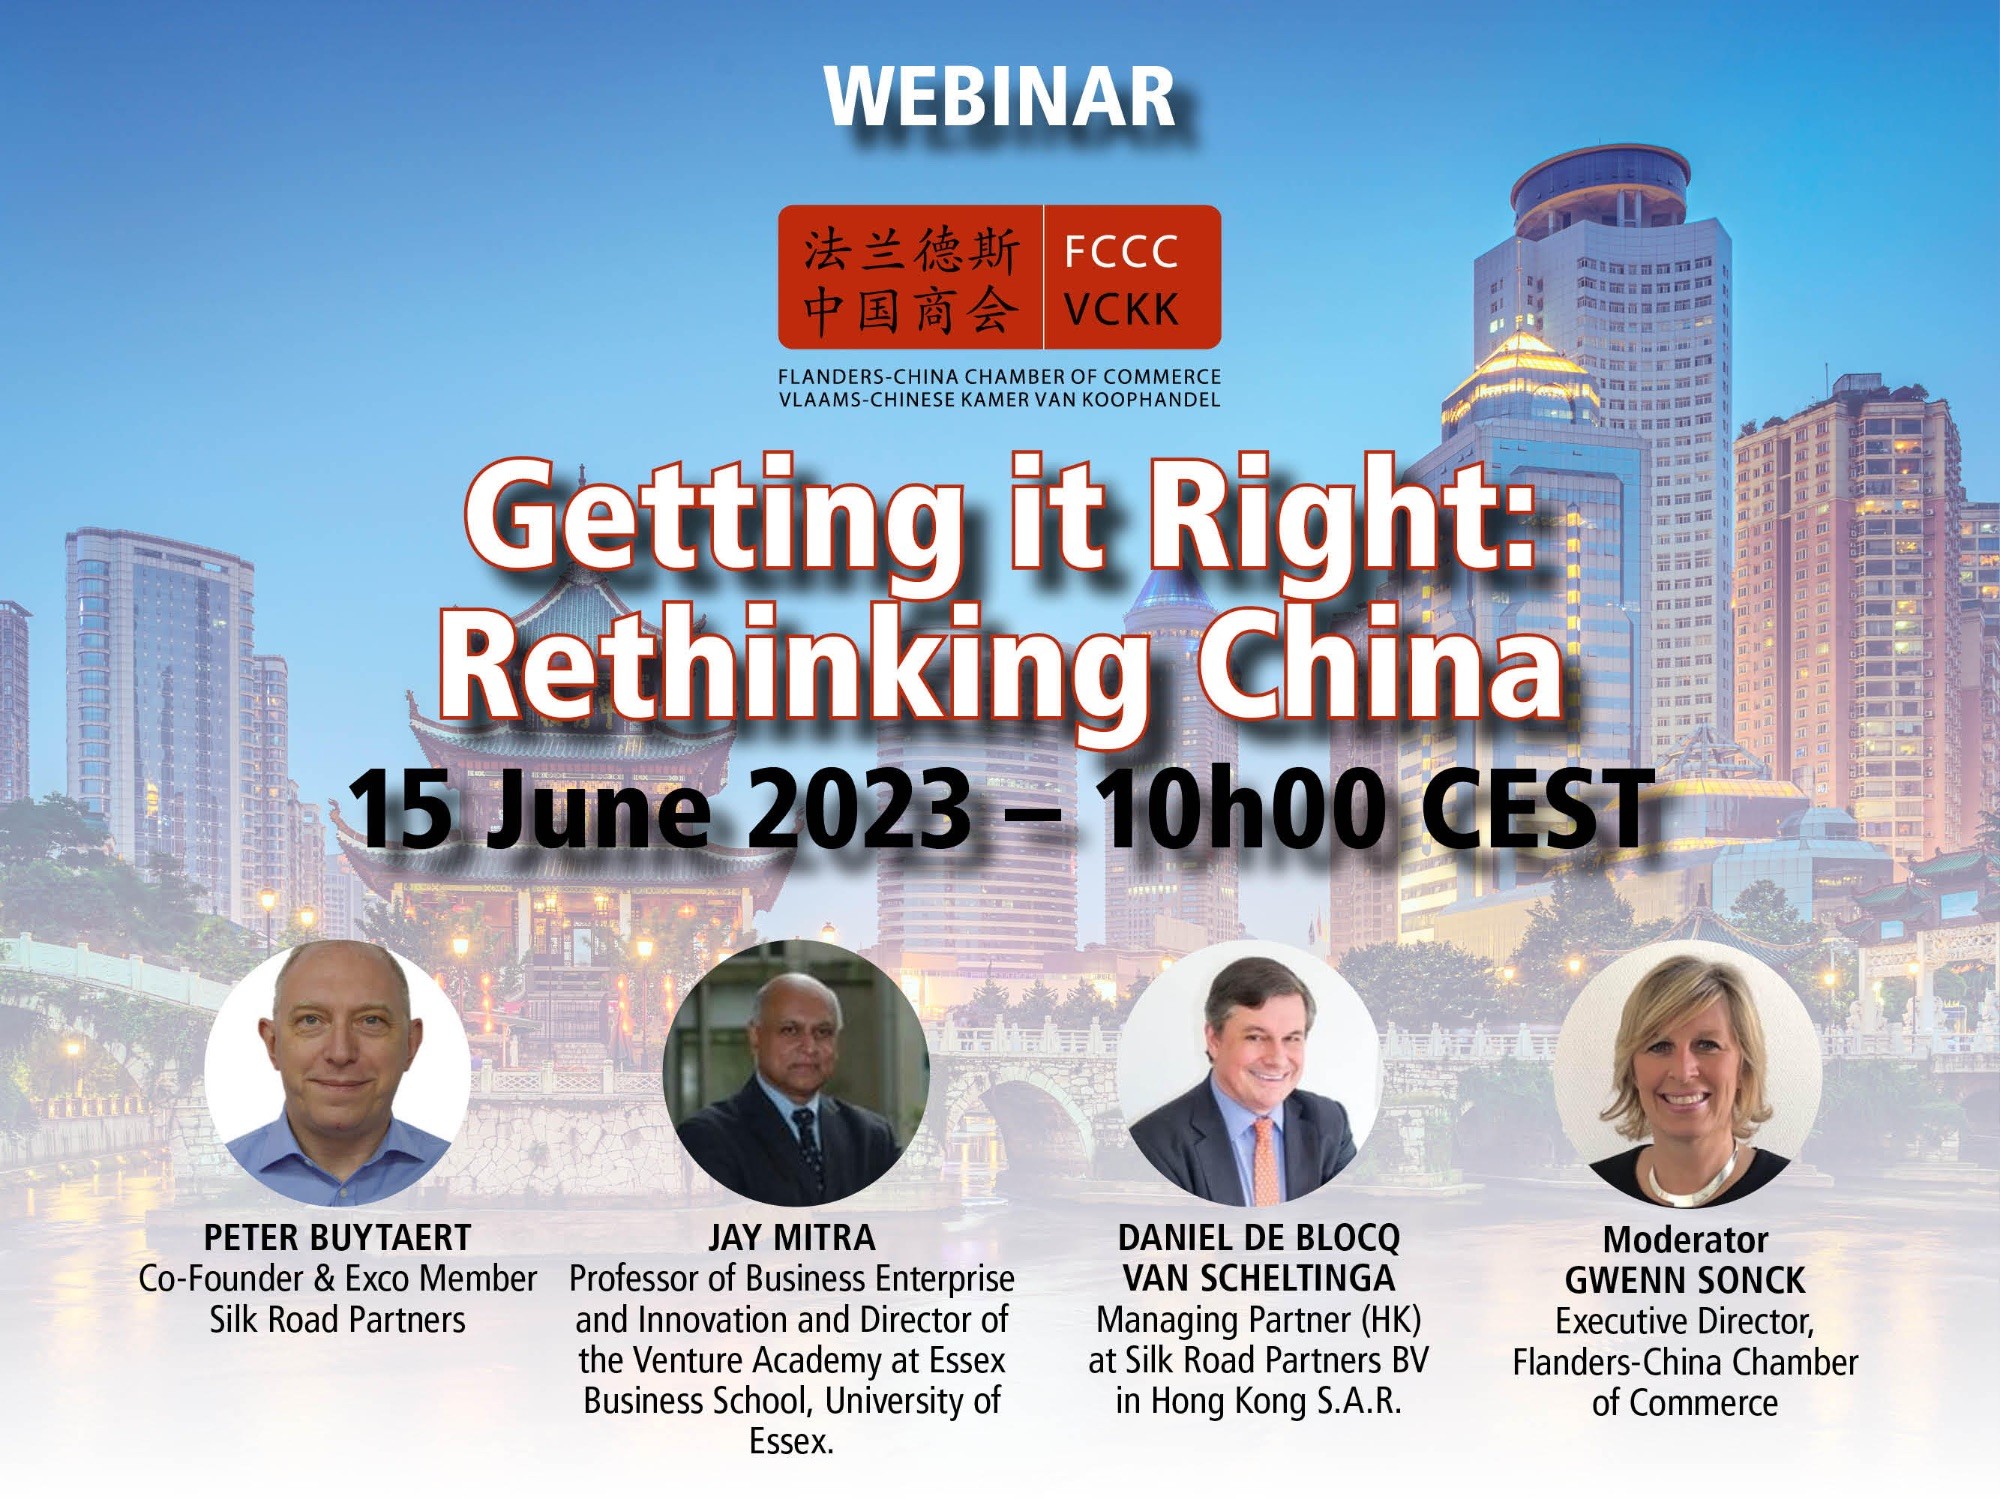 Webinar: “Getting it Right: Rethinking China” – 15 June, 10h00 CEST